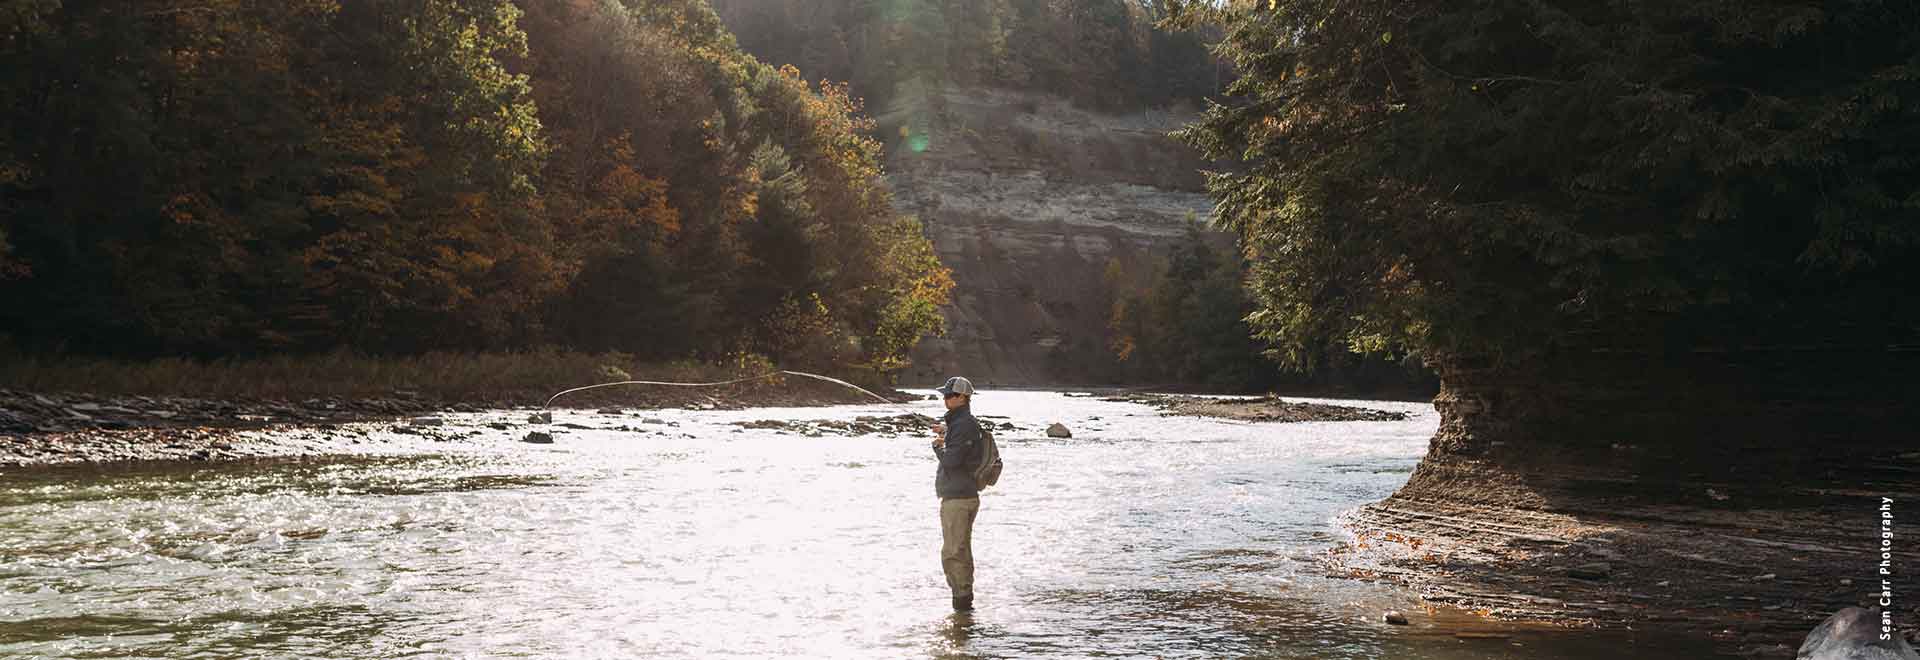 Fly Fishing on the Cattaraugus Creek in Zoar Valley with Adventure Bound OnTheFly